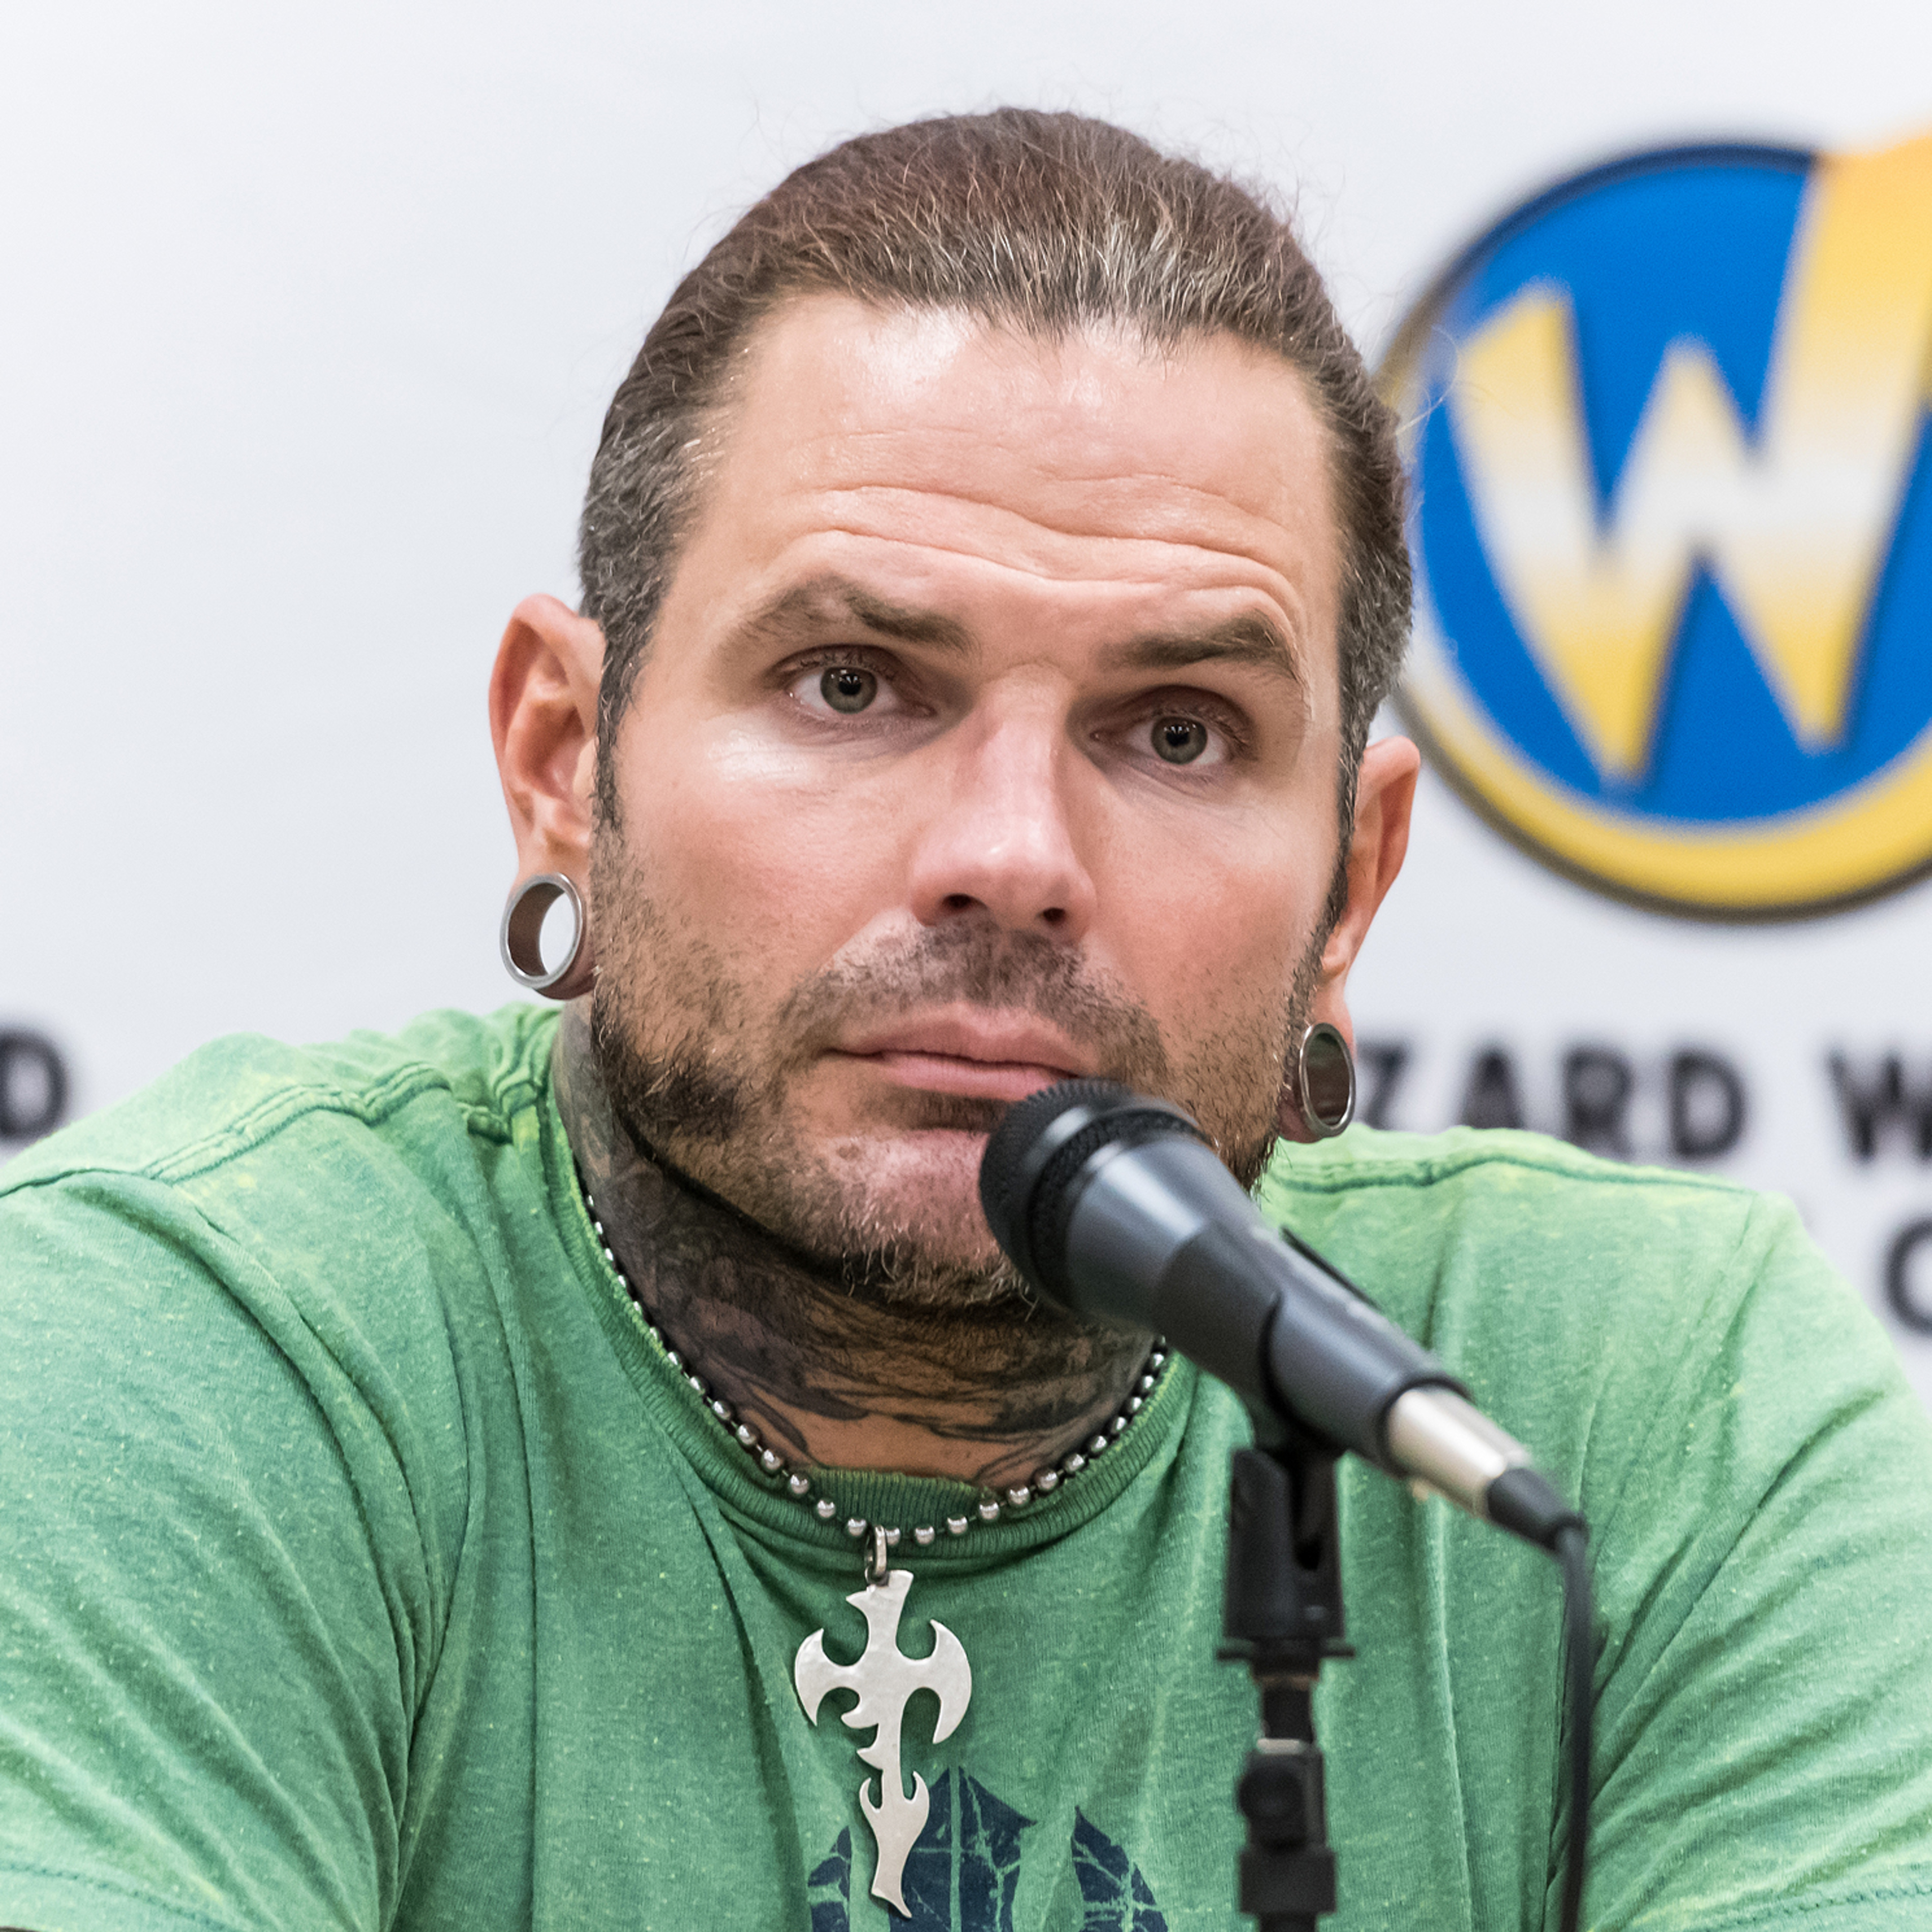 AEW’s Jeff Hardy Pleads Not Guilty to All 3 Charges Stemming from DUI Arrest